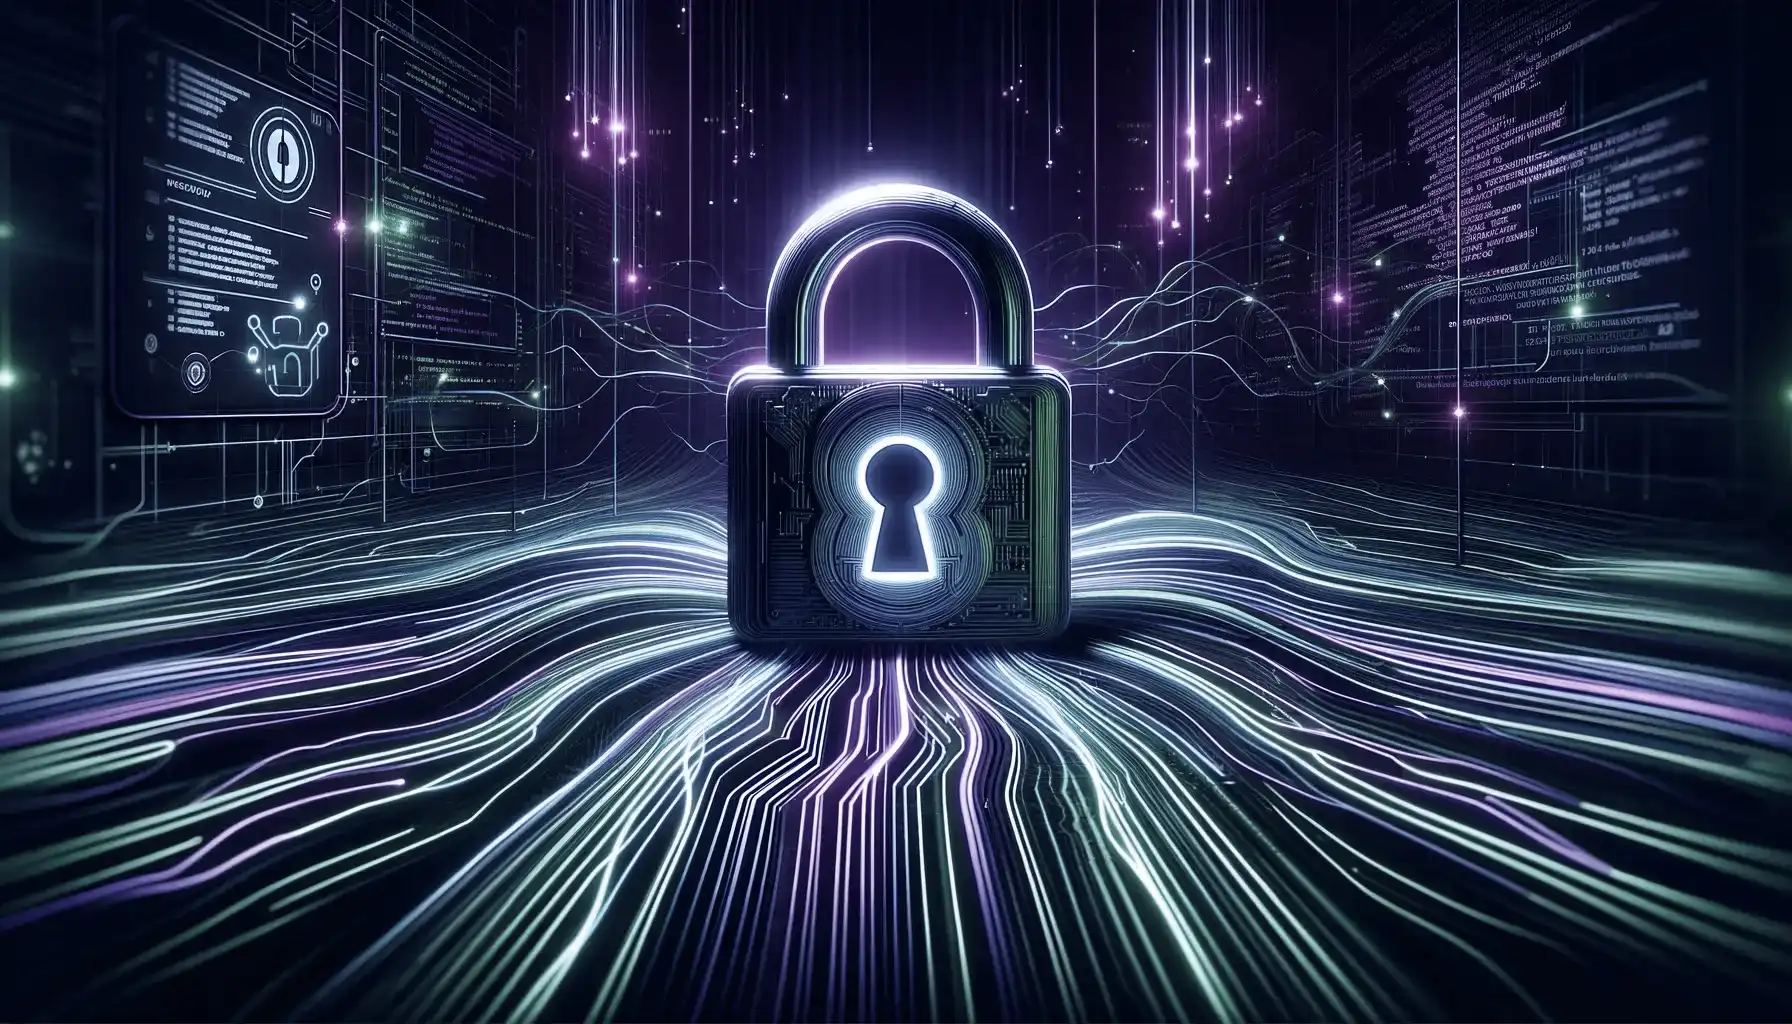 An image visualizing the security of cloud migration services. In the center, a glowing padlock symbolizing robust cybersecurity floats above a digital landscape. The lock is illuminated with a bright neon outline, emphasizing its impenetrable nature. Vibrant neon lines in green and purple hues flow outward from the lock, representing secure data streams within the cloud infrastructure. The background features cascading binary code and digital interfaces, suggestive of complex encryption and secure data transfer protocols. This imagery conveys a message of advanced, reliable, and secure cloud migration services.